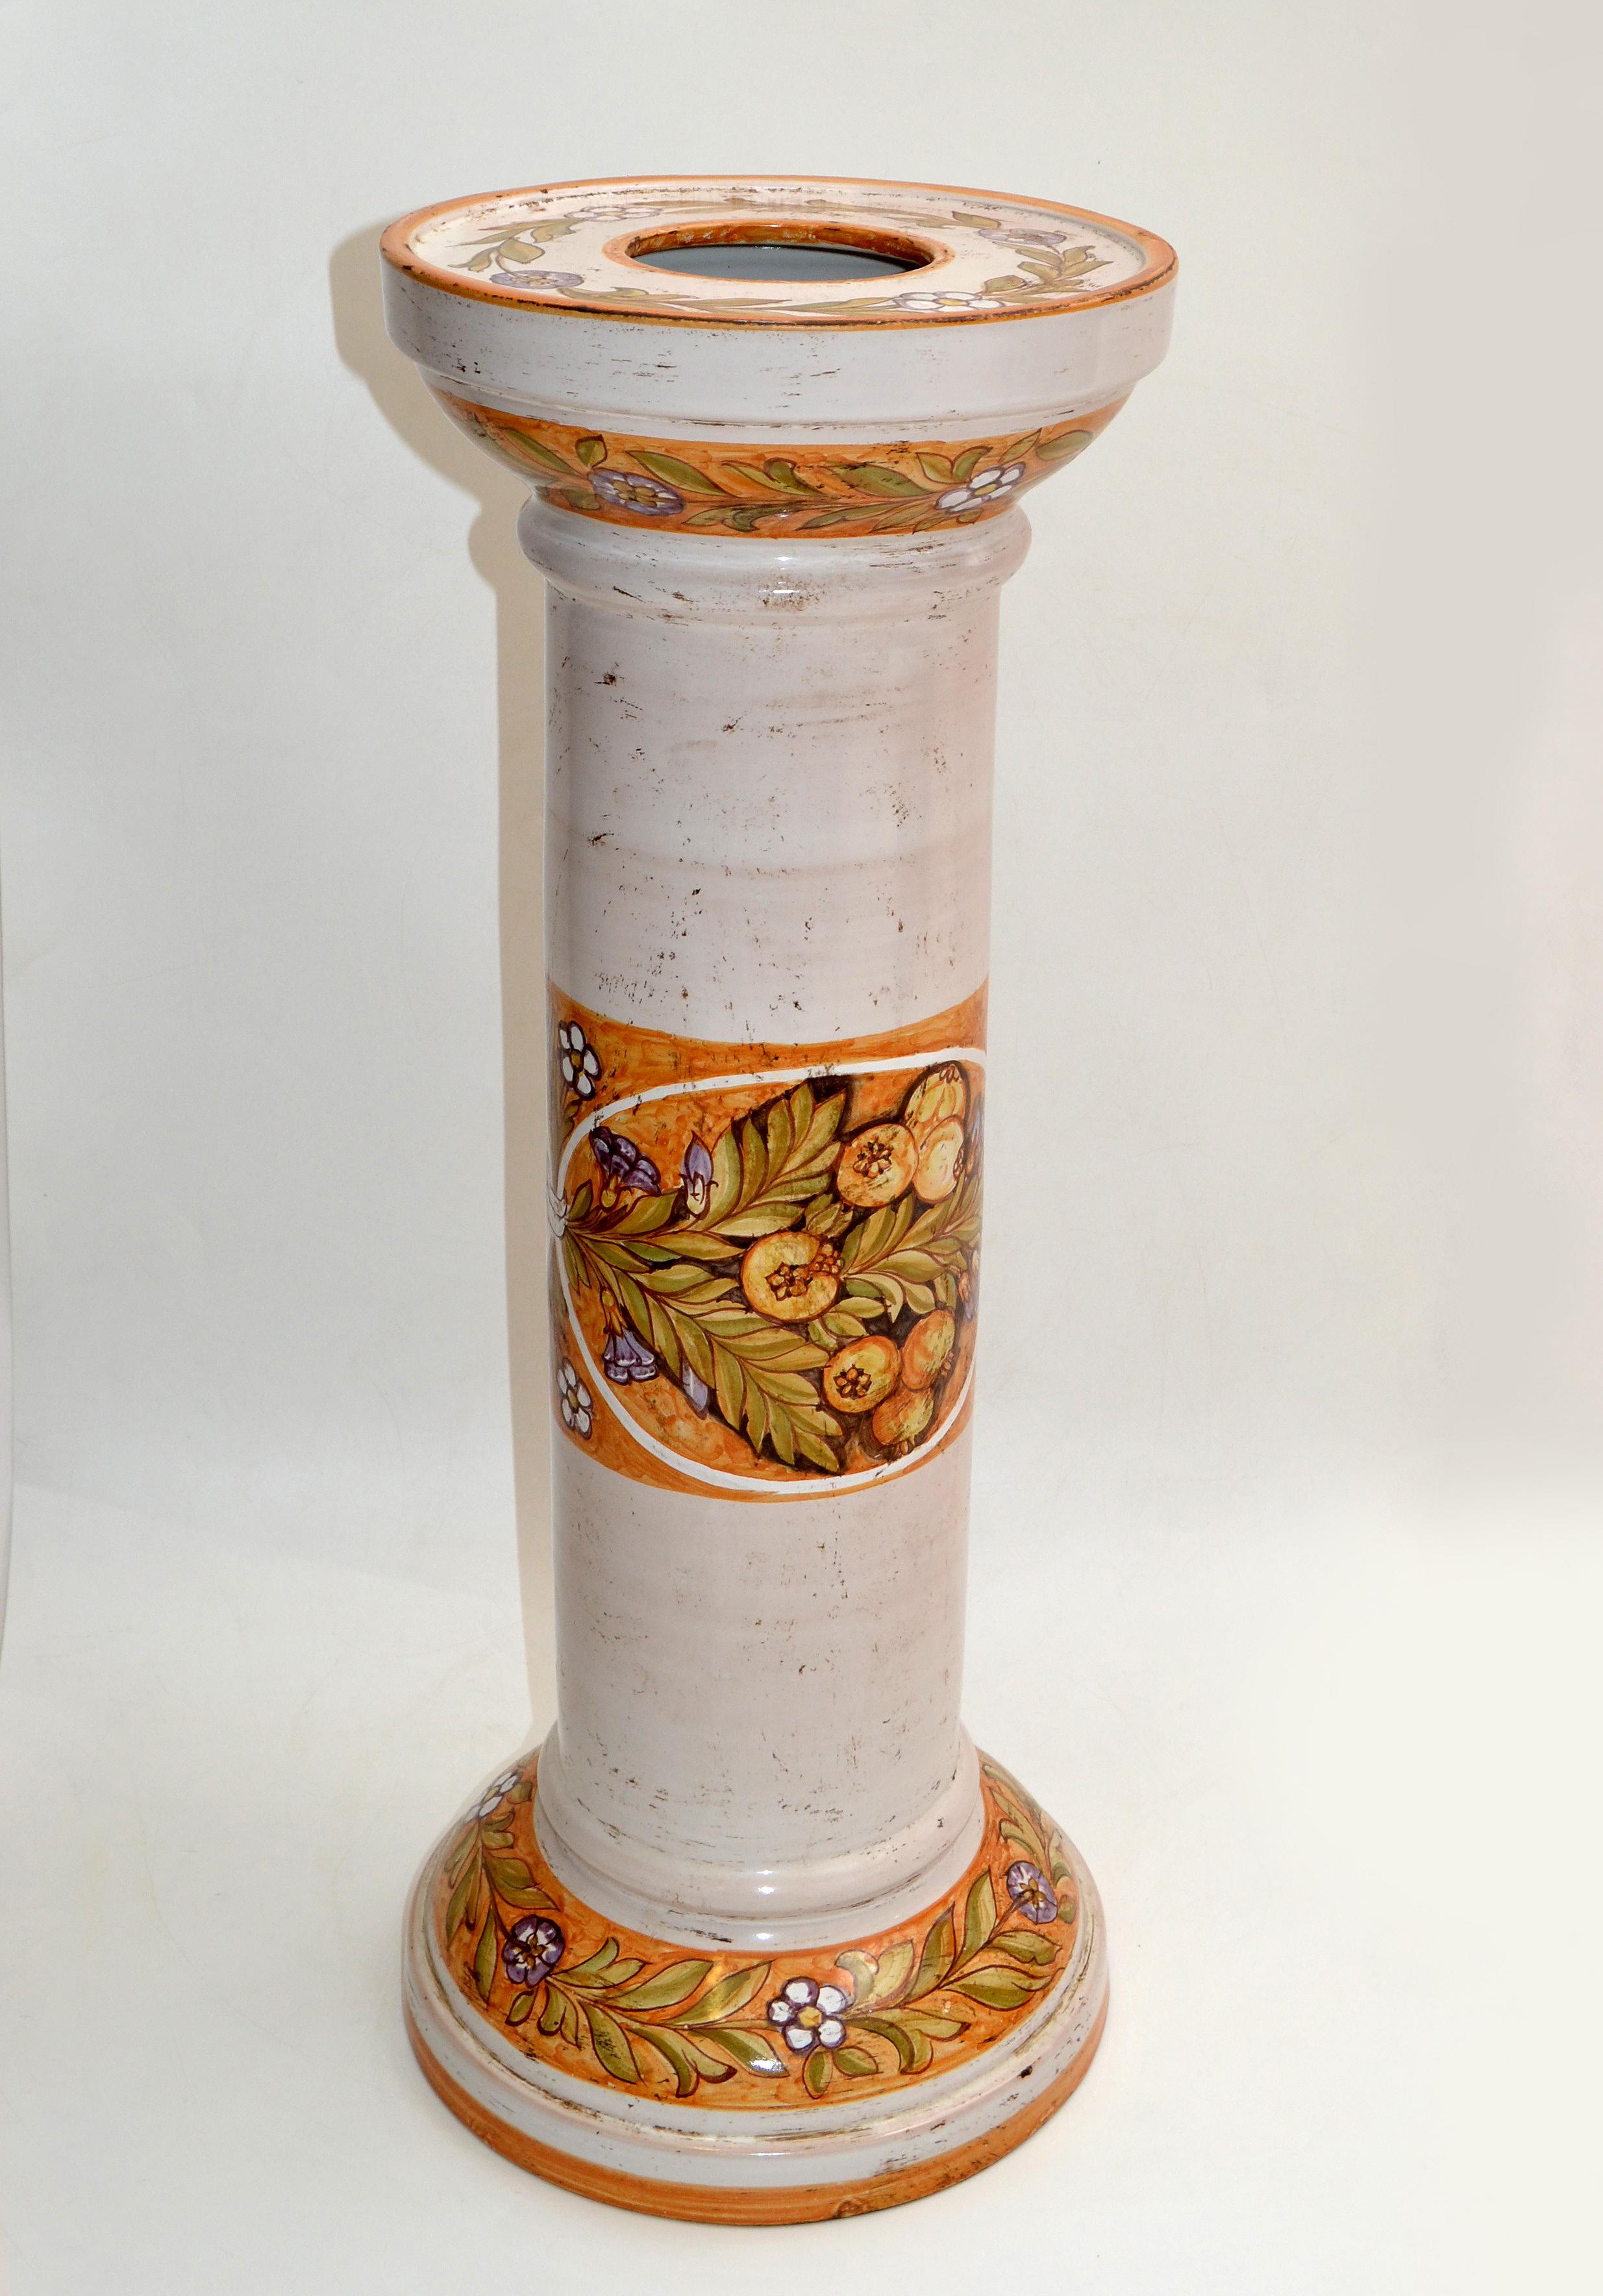 Signed Deruta Pottery Hand Painted Ceramic Pedestal Sculpture Stand Column Italy For Sale 1